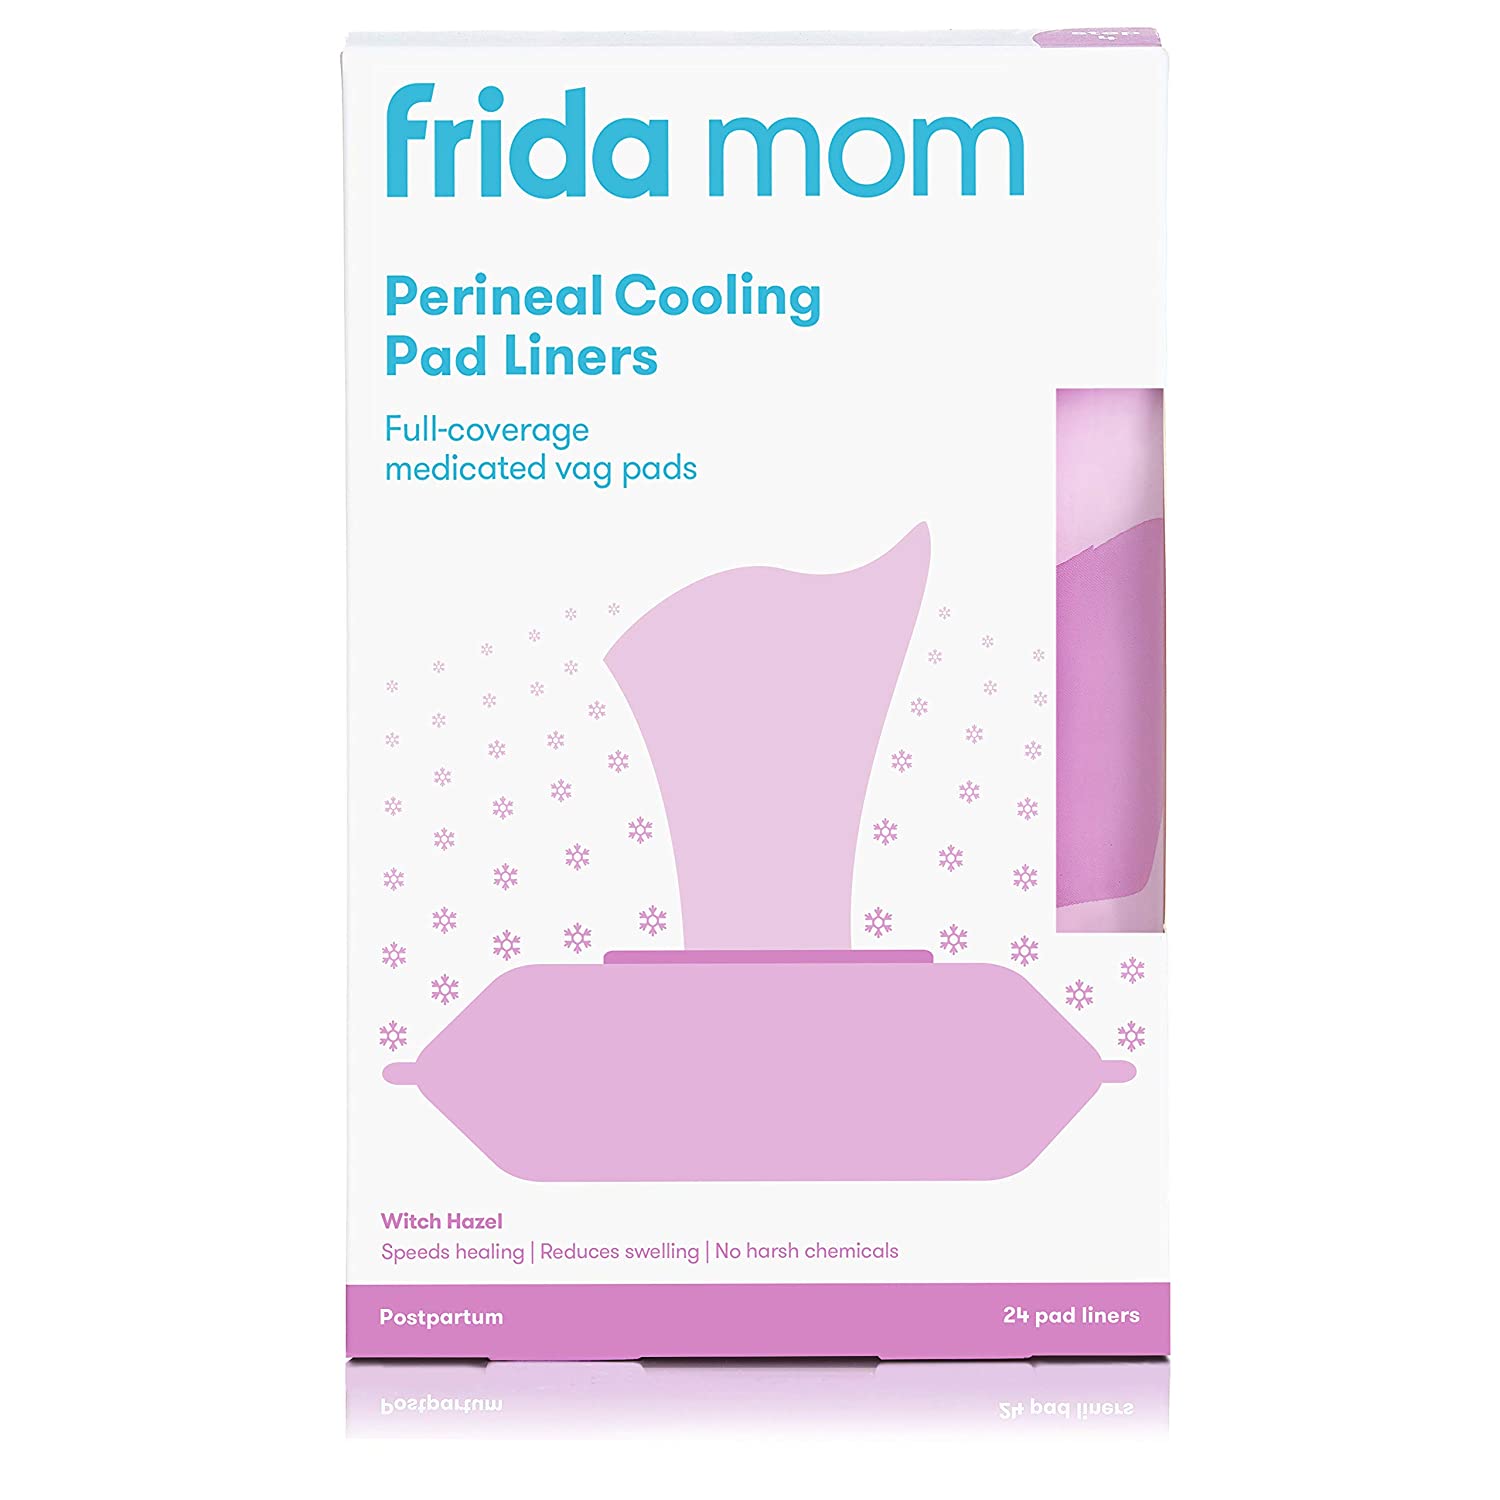 Perineal Medicated Witch Hazel Full-Length Cooling Pad Liners for Postpartum Care by Frida Mom